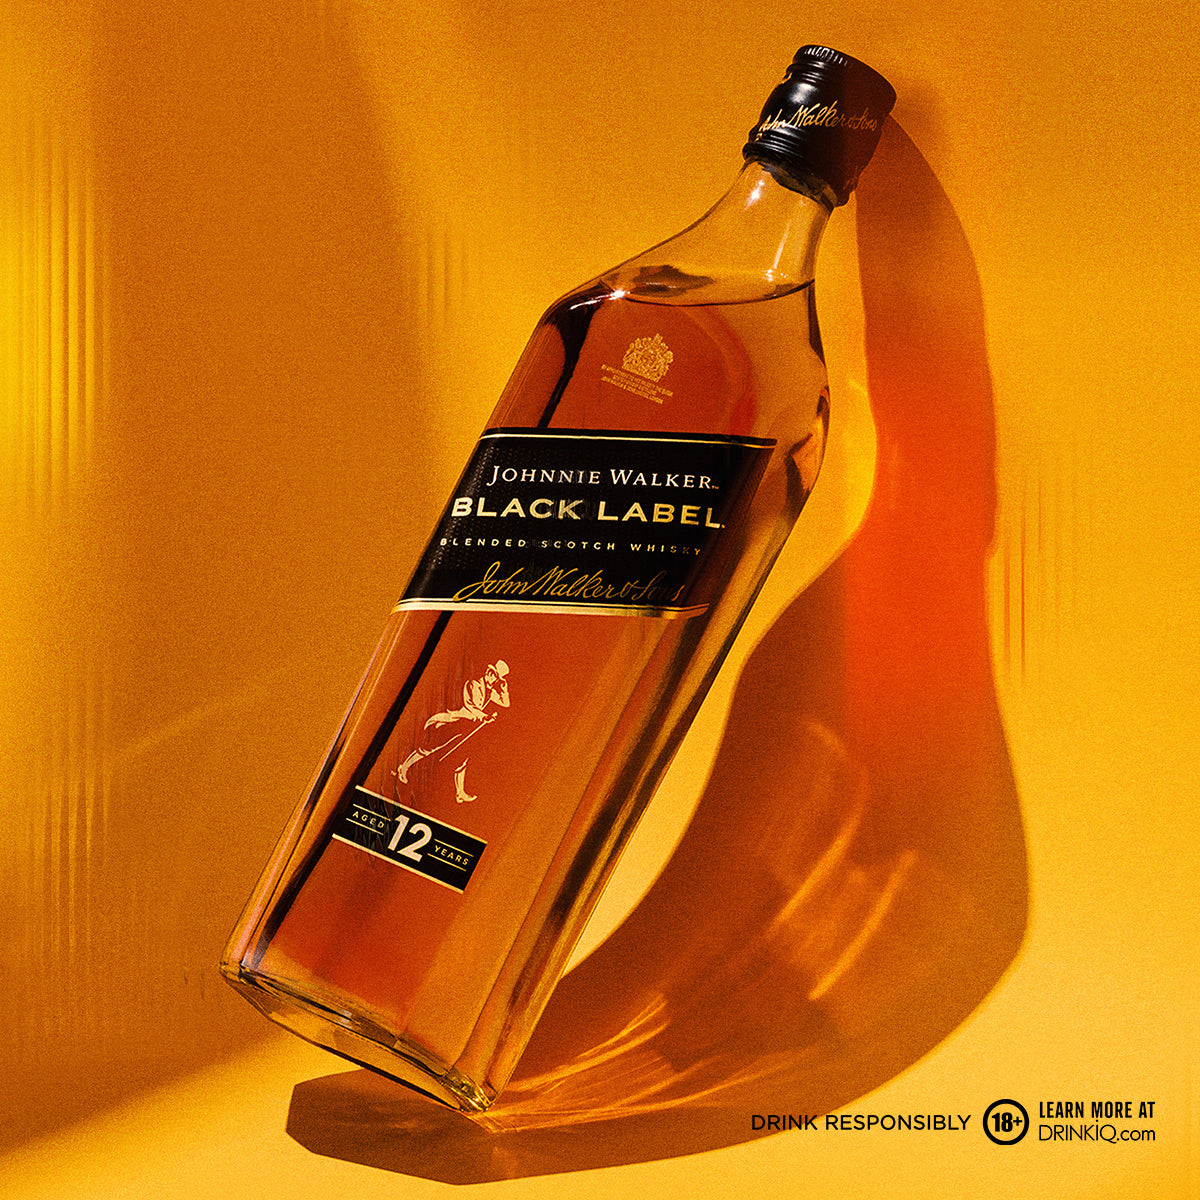 Johnnie Walker Black Label 12 Years Old Scotch Blended, Product page